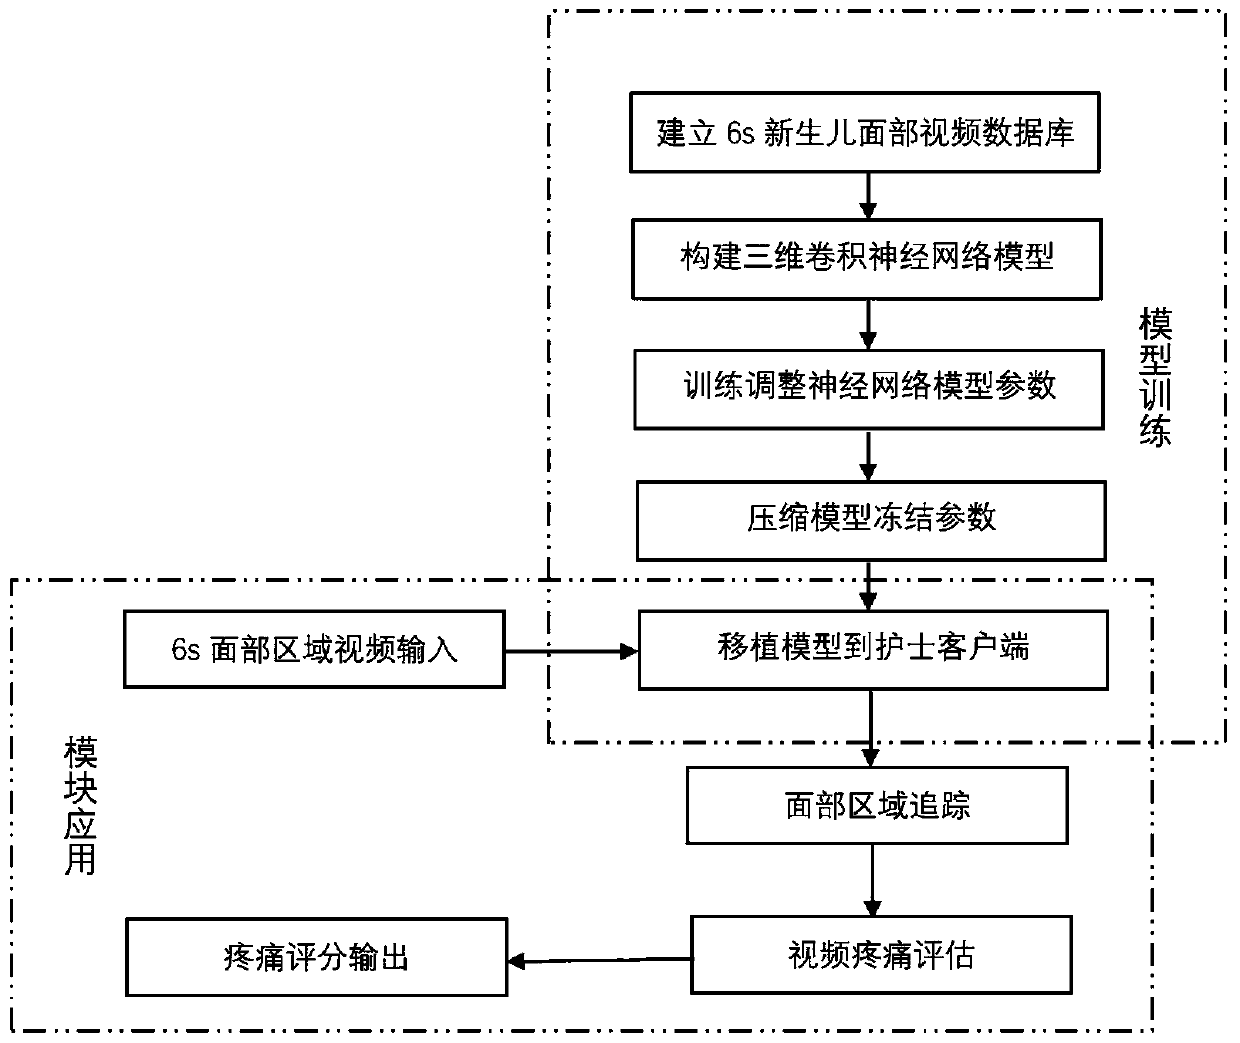 Neonatal pain closed-loop management system and method